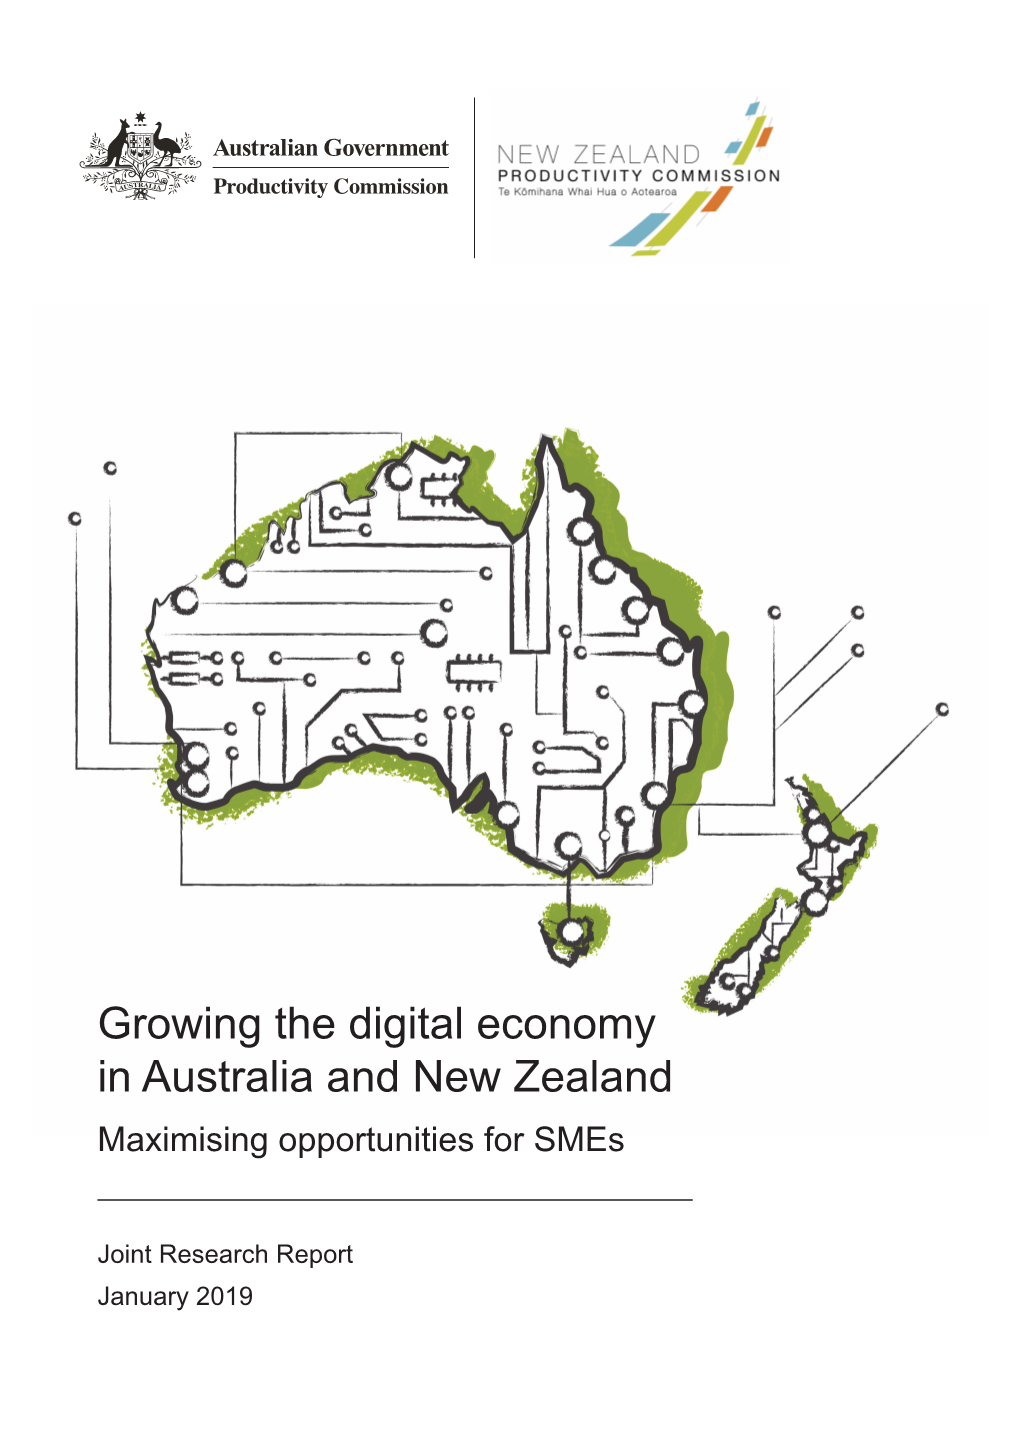 Growing the Digital Economy in Australia and New Zealand Maximising Opportunities for Smes